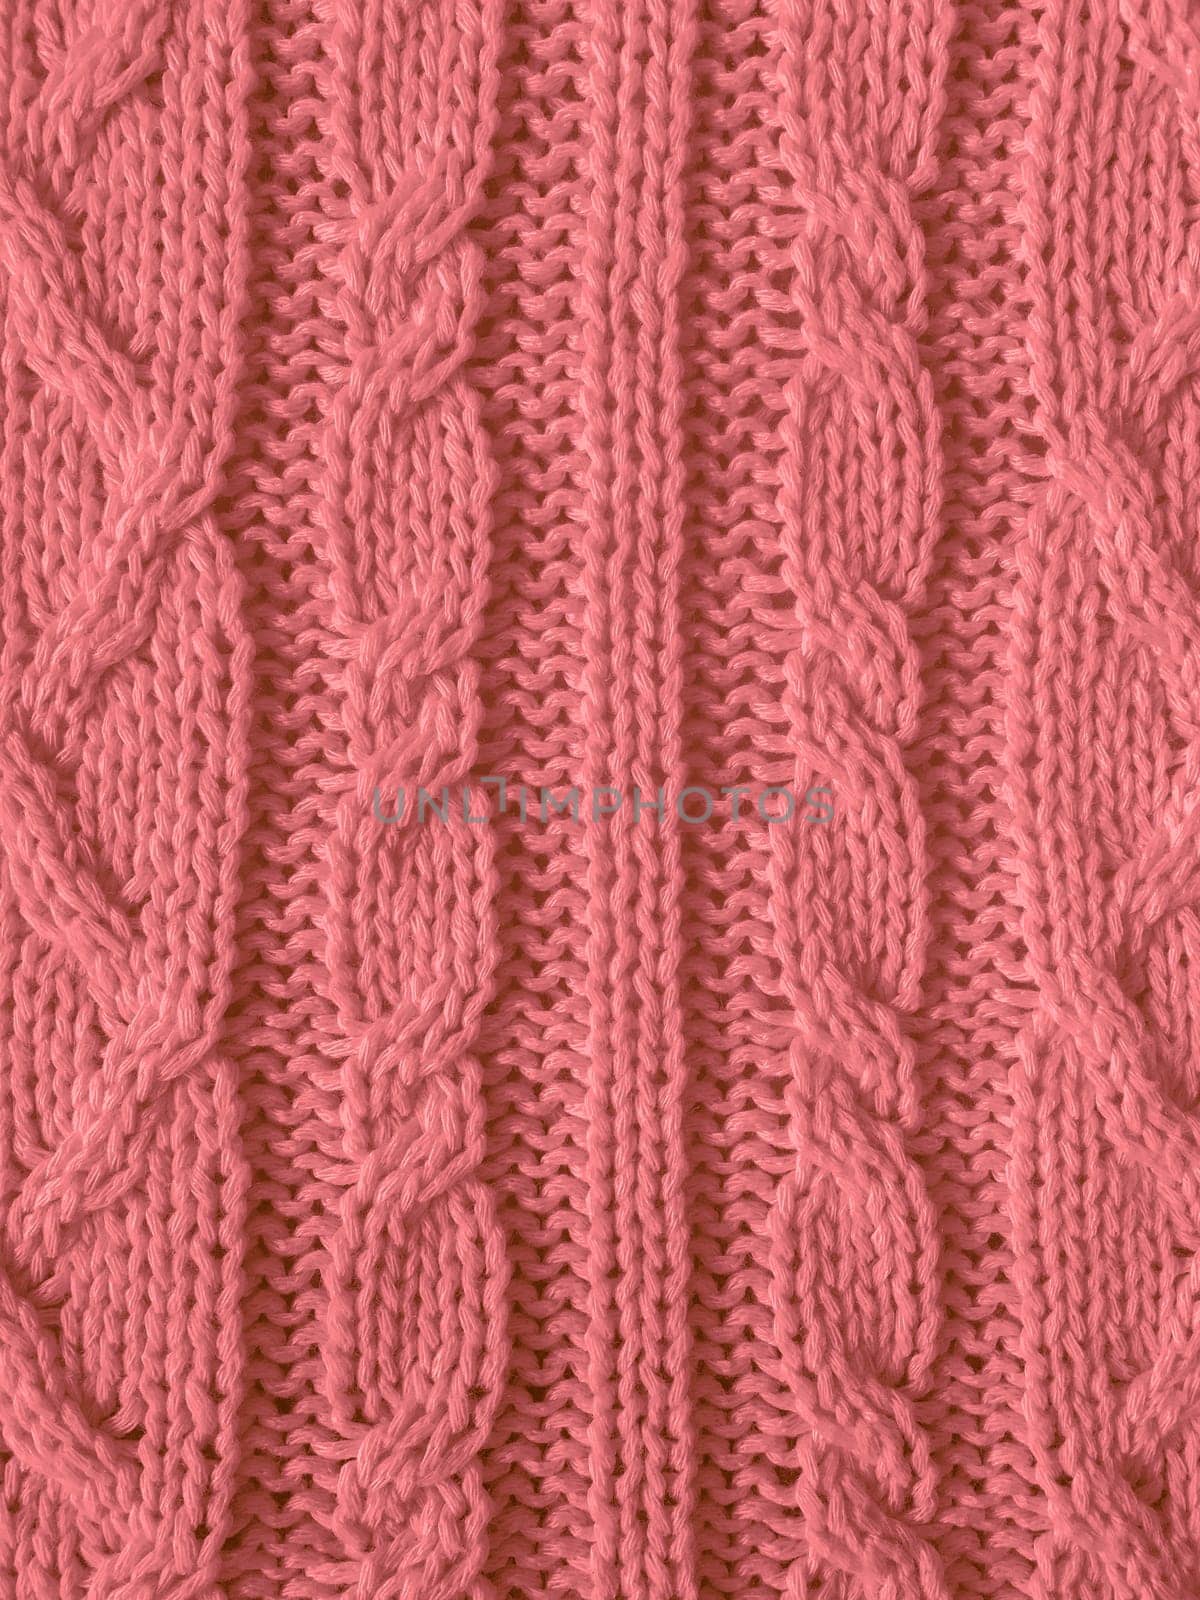 Organic knitted background with detail weave threads. by YASNARADA